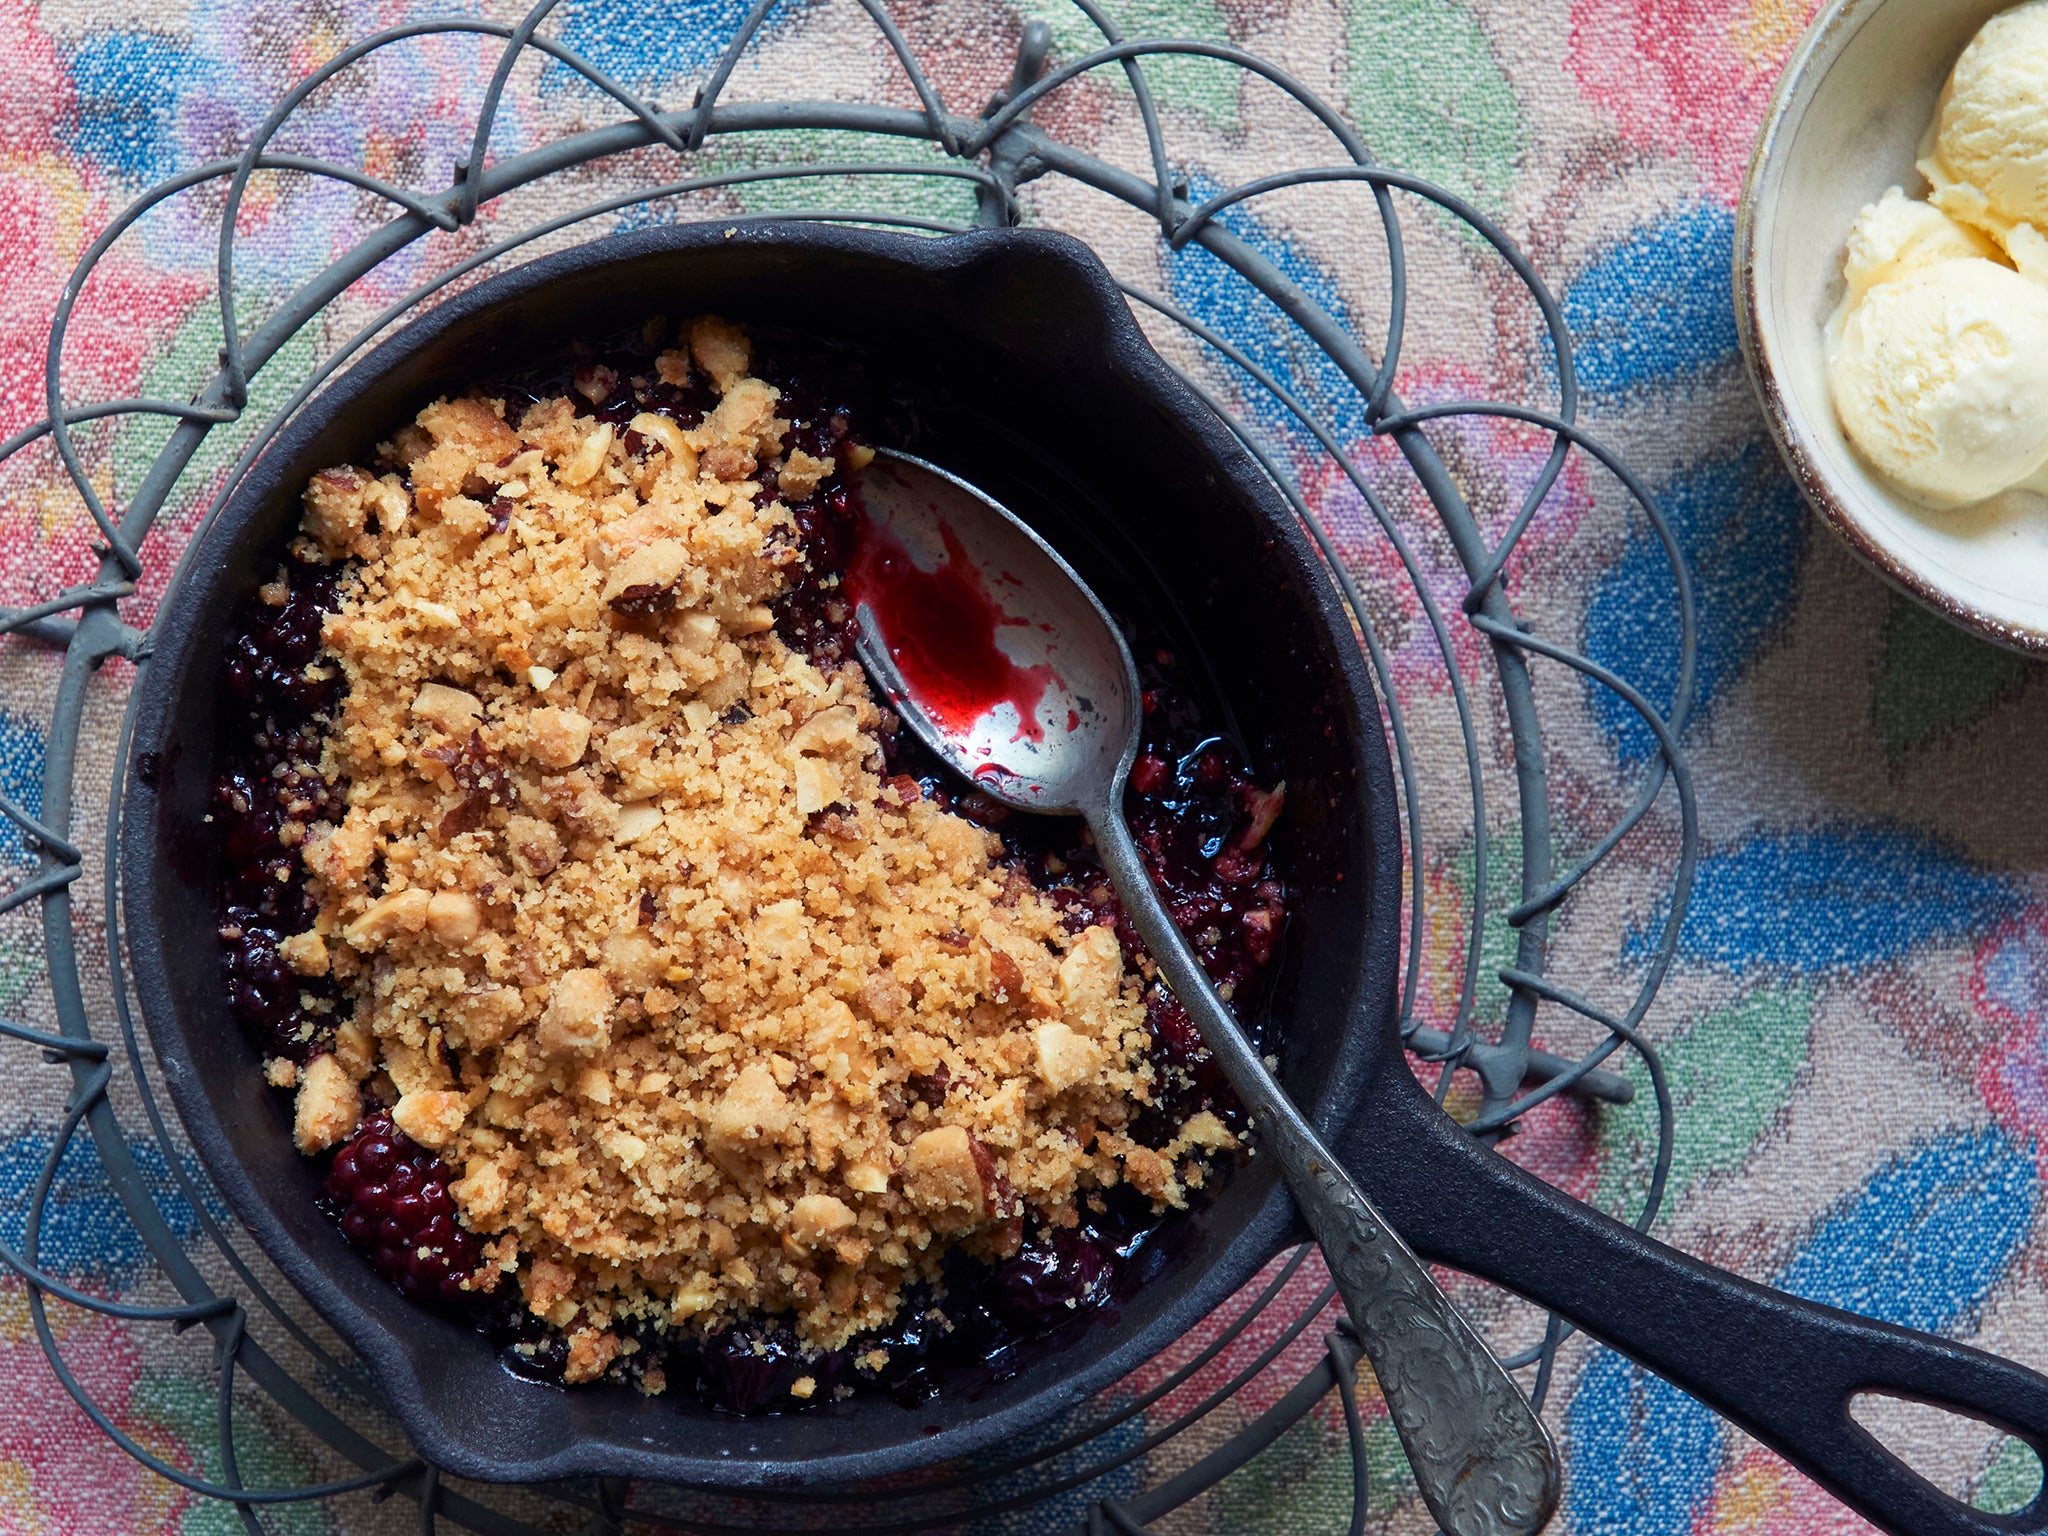 On the hob: Pan-share blackberry crumble